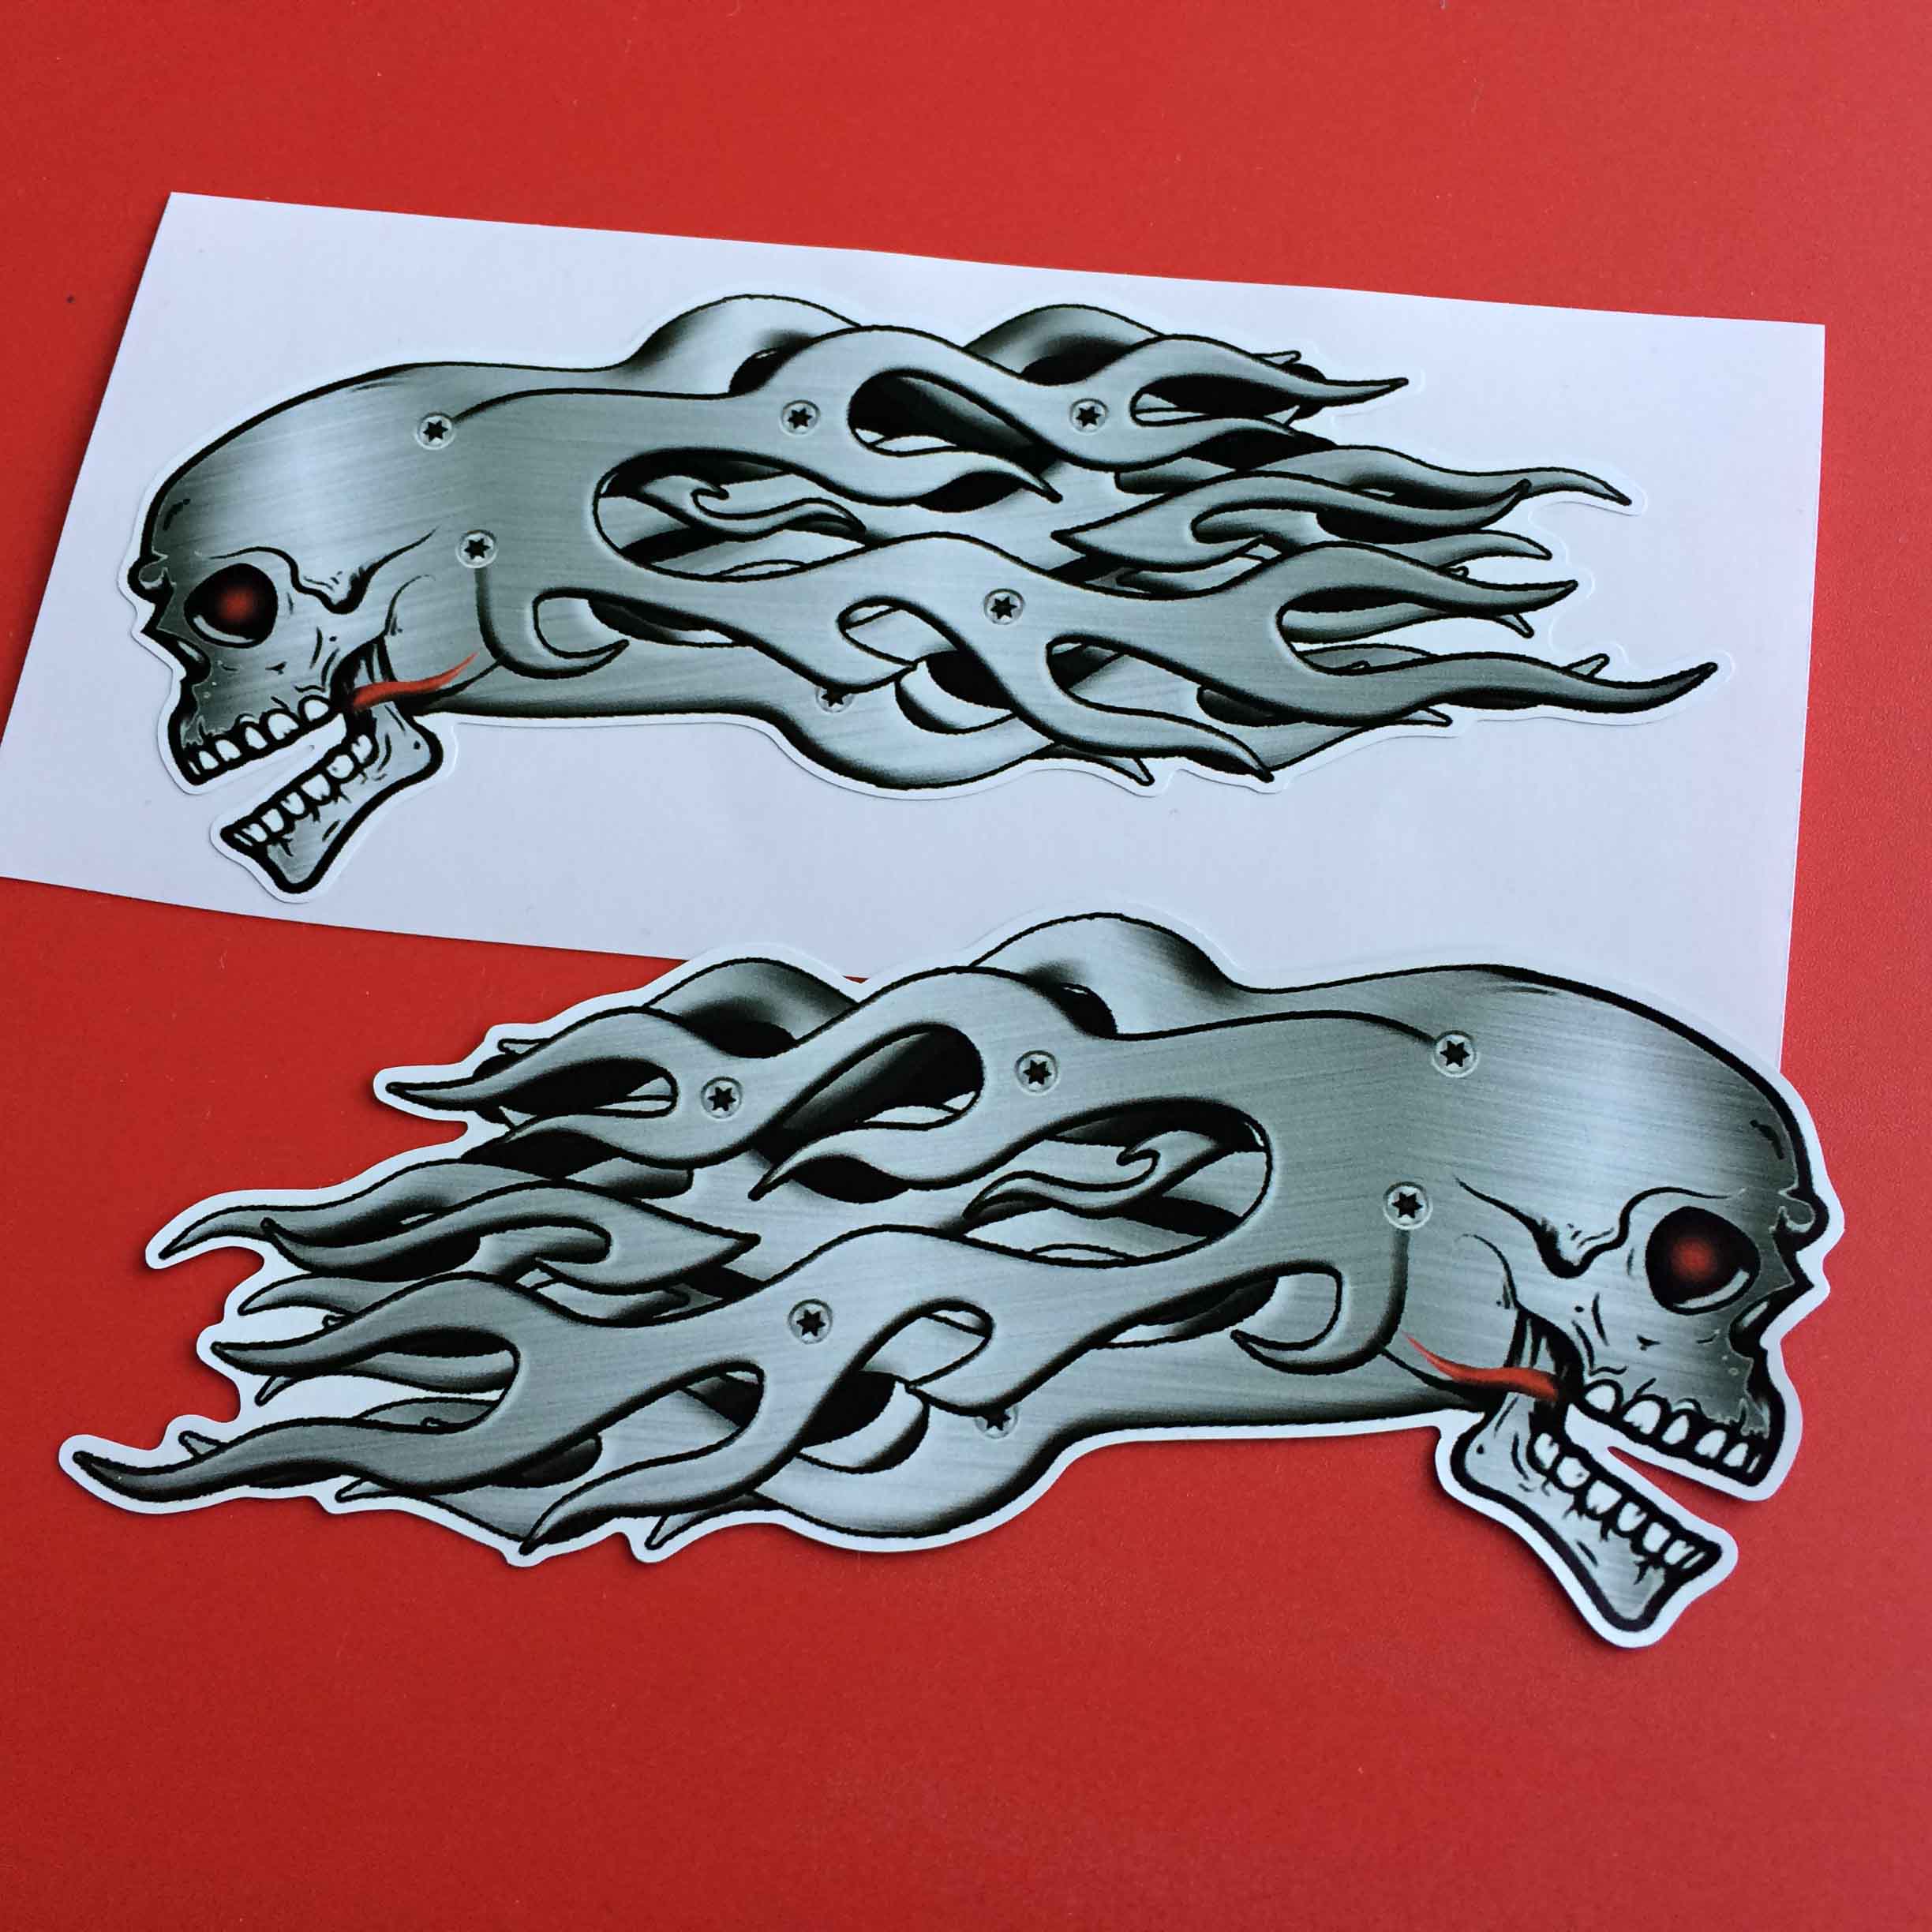 MAD SKULL AND FLAMES STICKERS. Side view of a metal skull with white teeth and red eye socket and tongue. Metal flames are flowing behind.